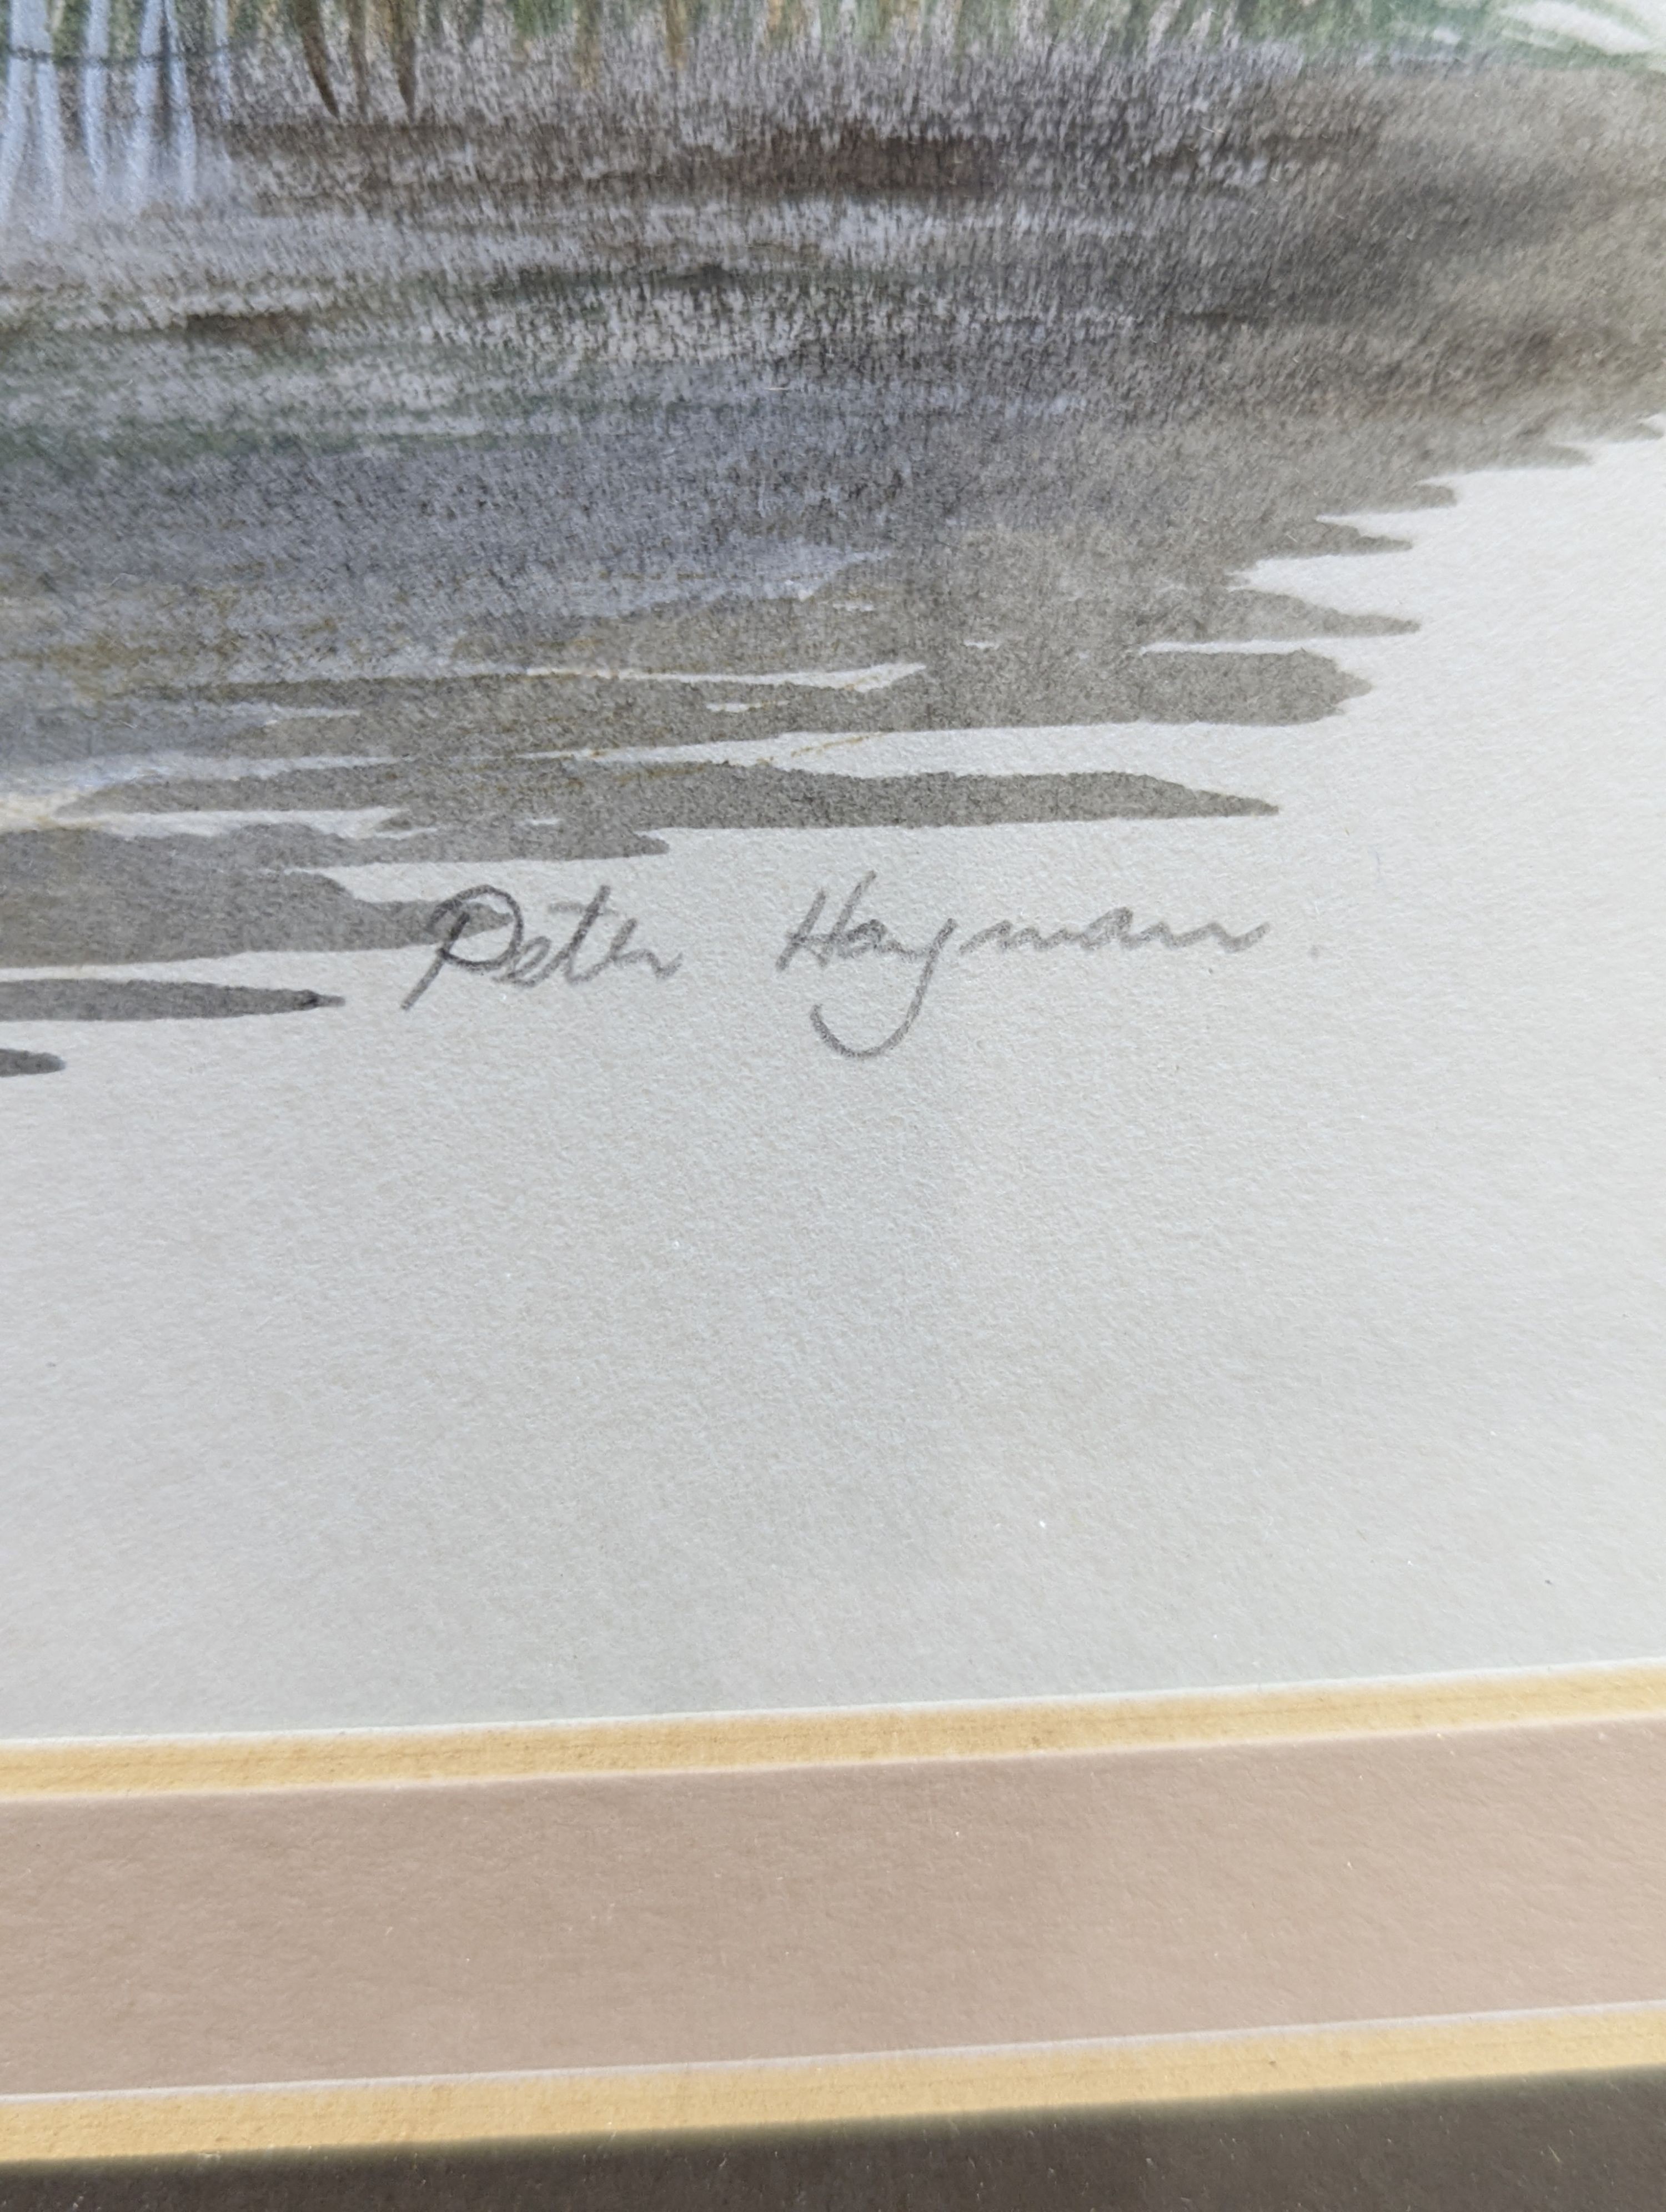 Peter Hayman (1930-), watercolour, Kingfisher beside a river, signed, 29 x 38cm